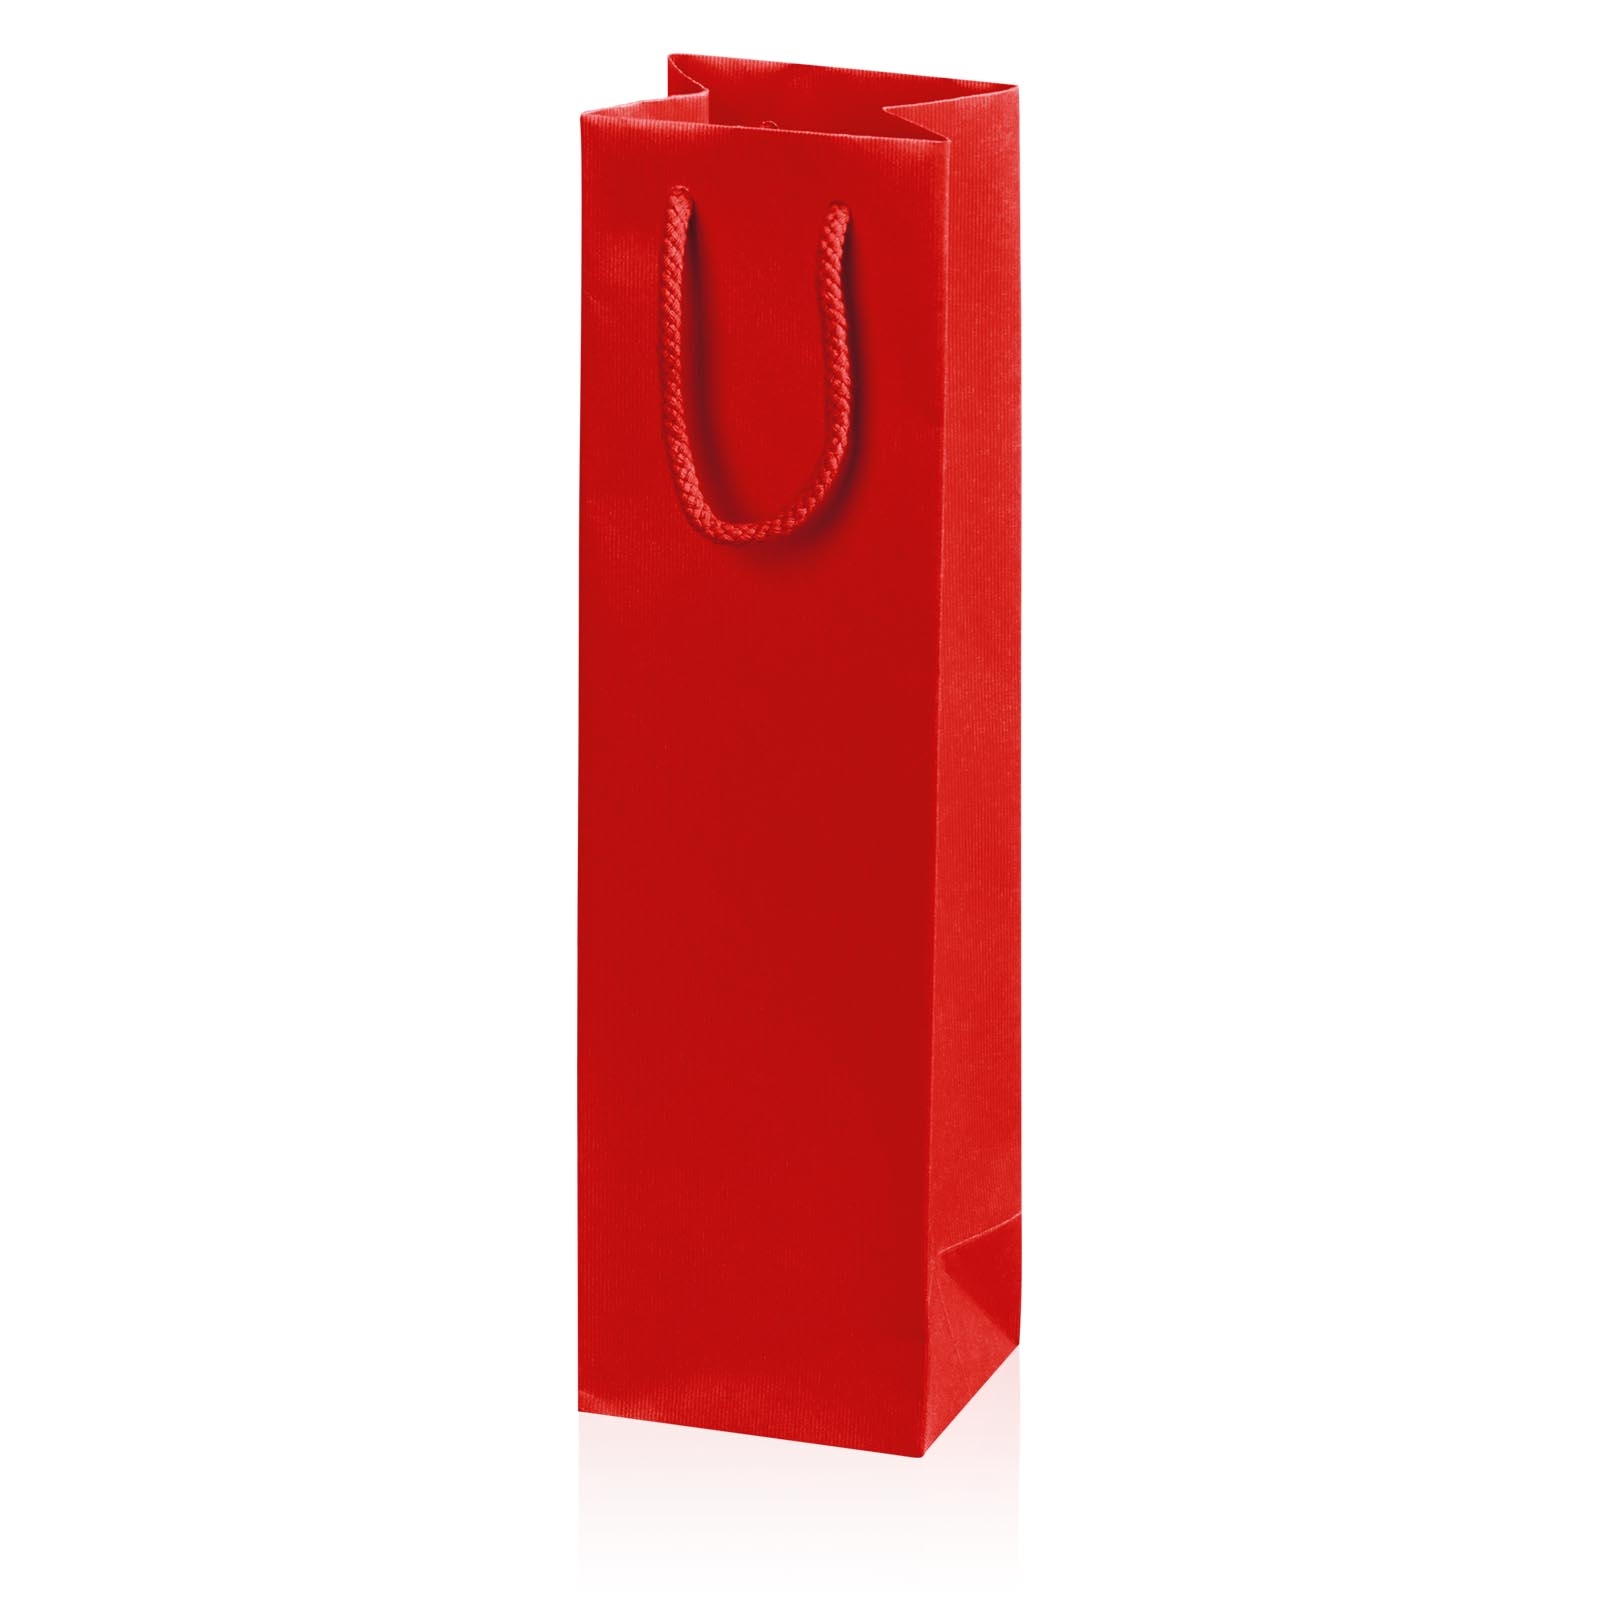 Picture of Pak à 20 1 fles draagtas 10+8,5x36 cm rood (uc)